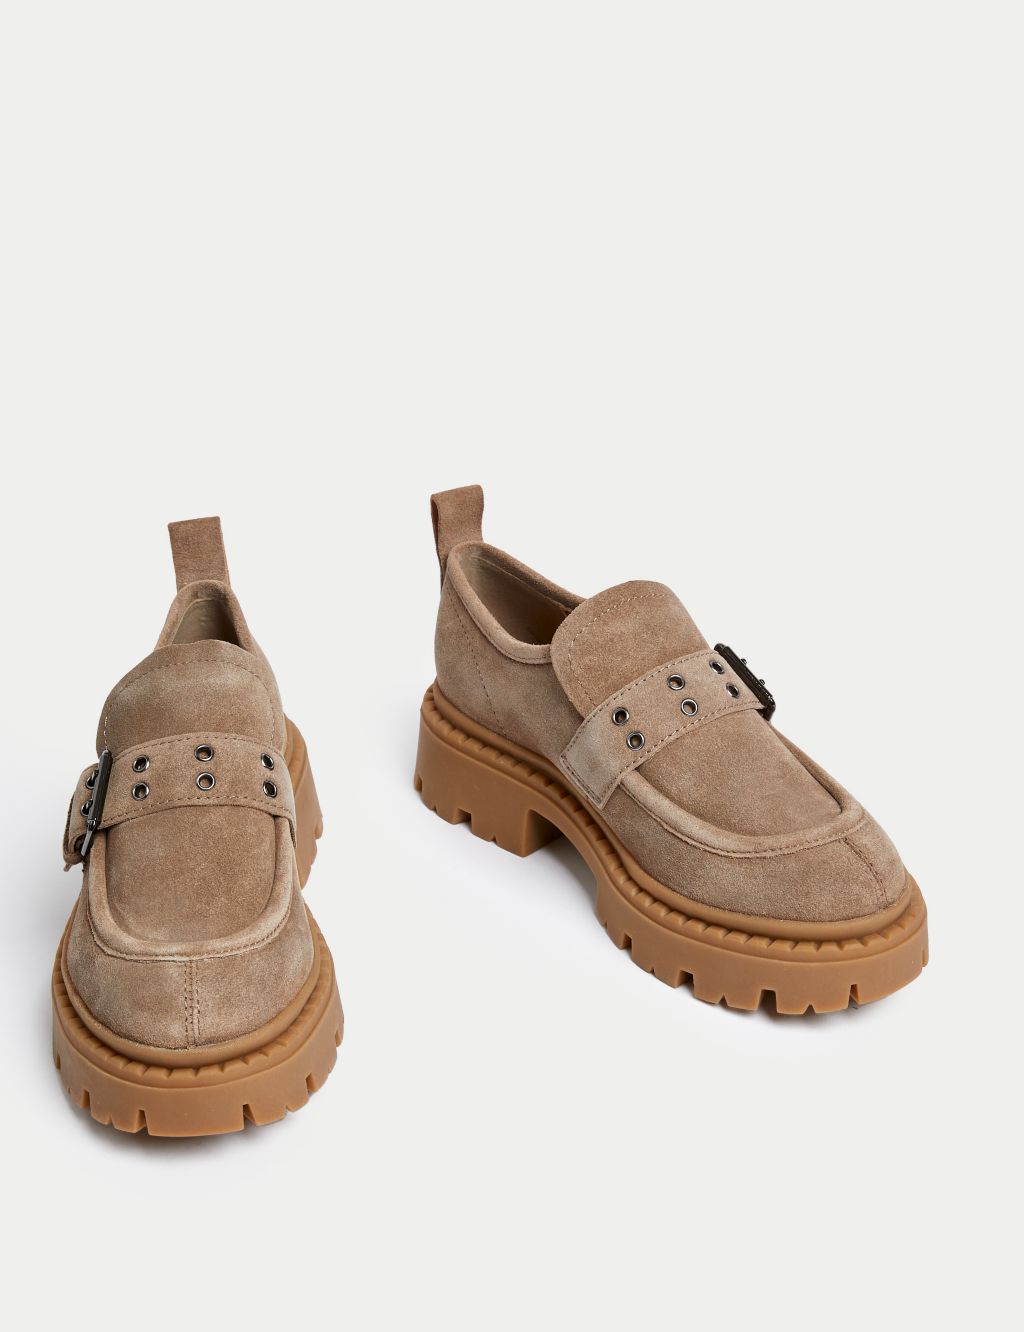 Suede Buckle Chunky Loafers image 2